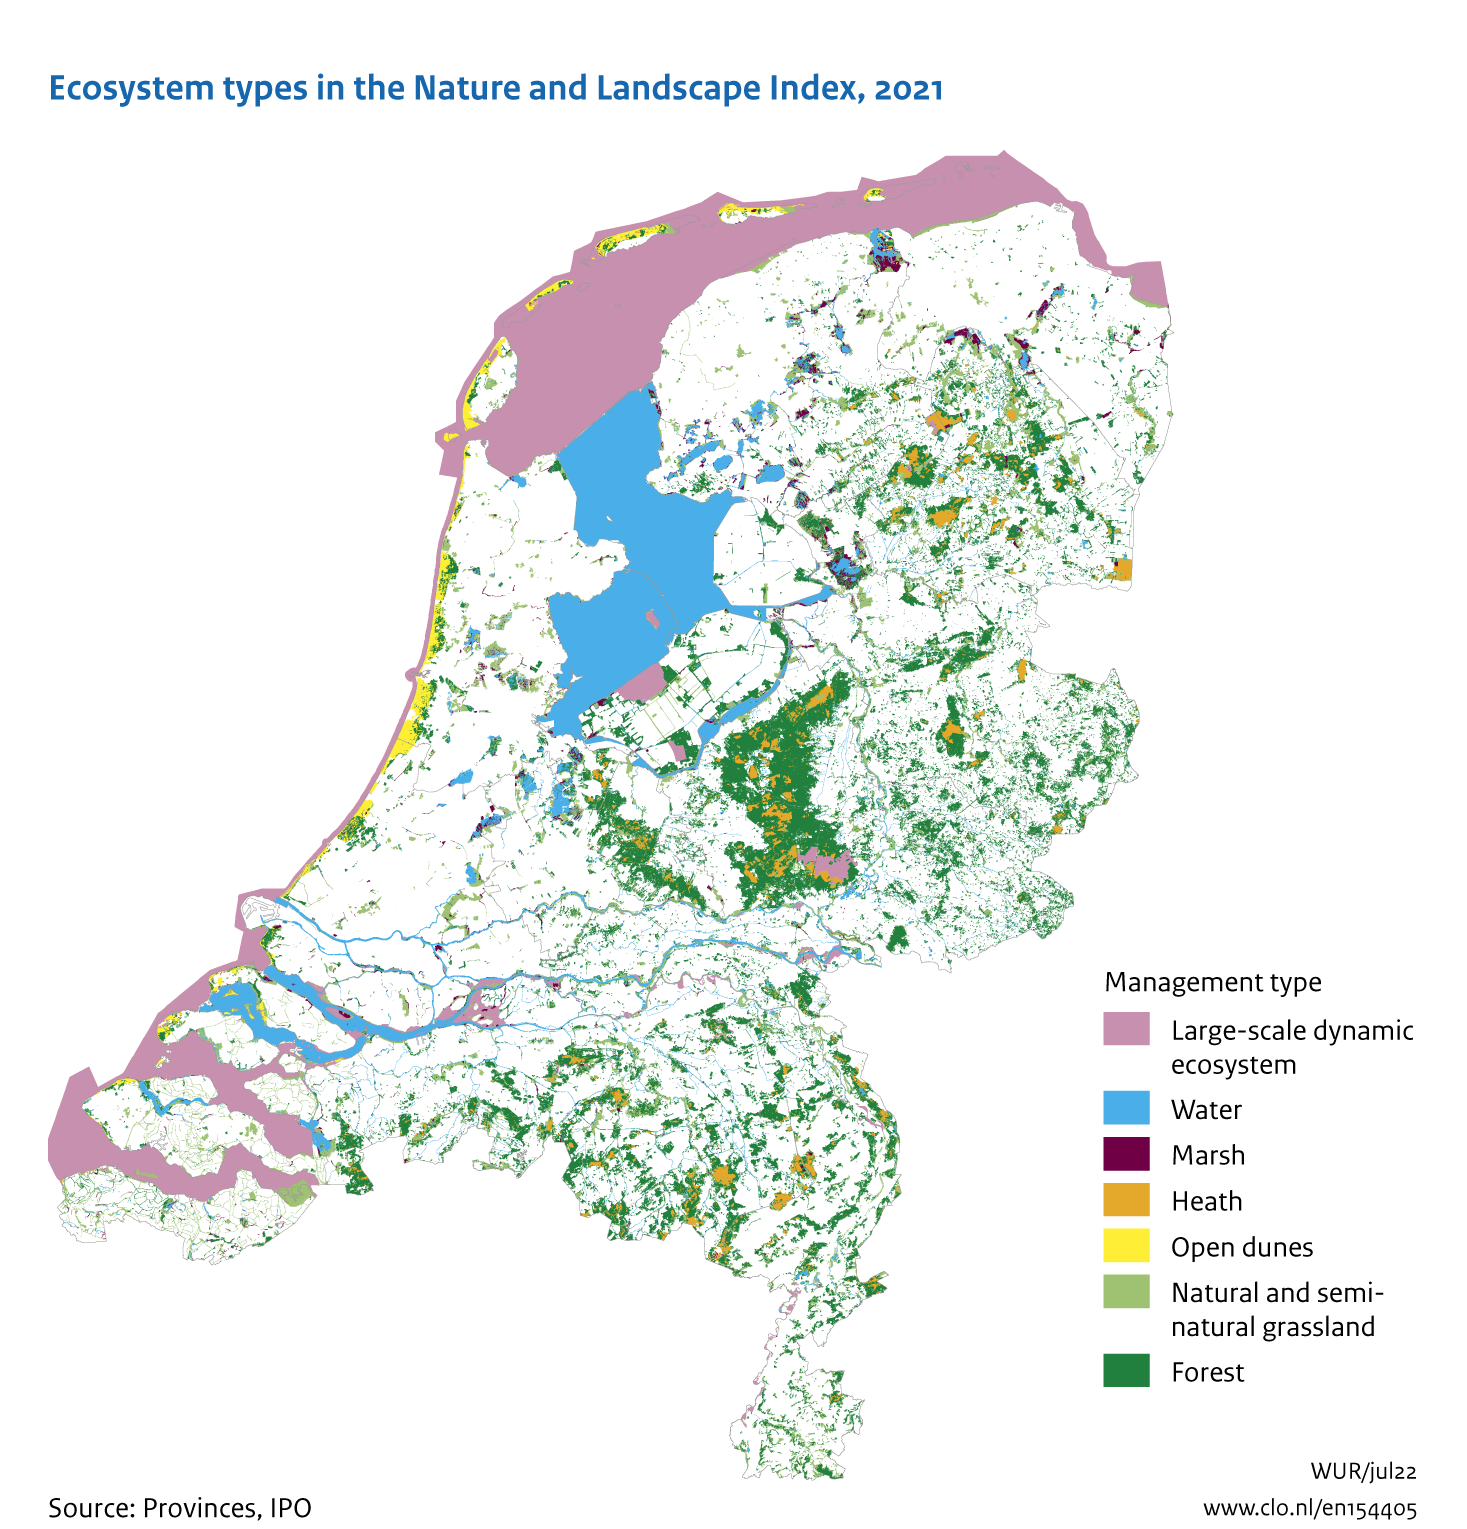 Image Ecosystem types of the Nature and Landscape Index (NL). The image is further explained in the text.